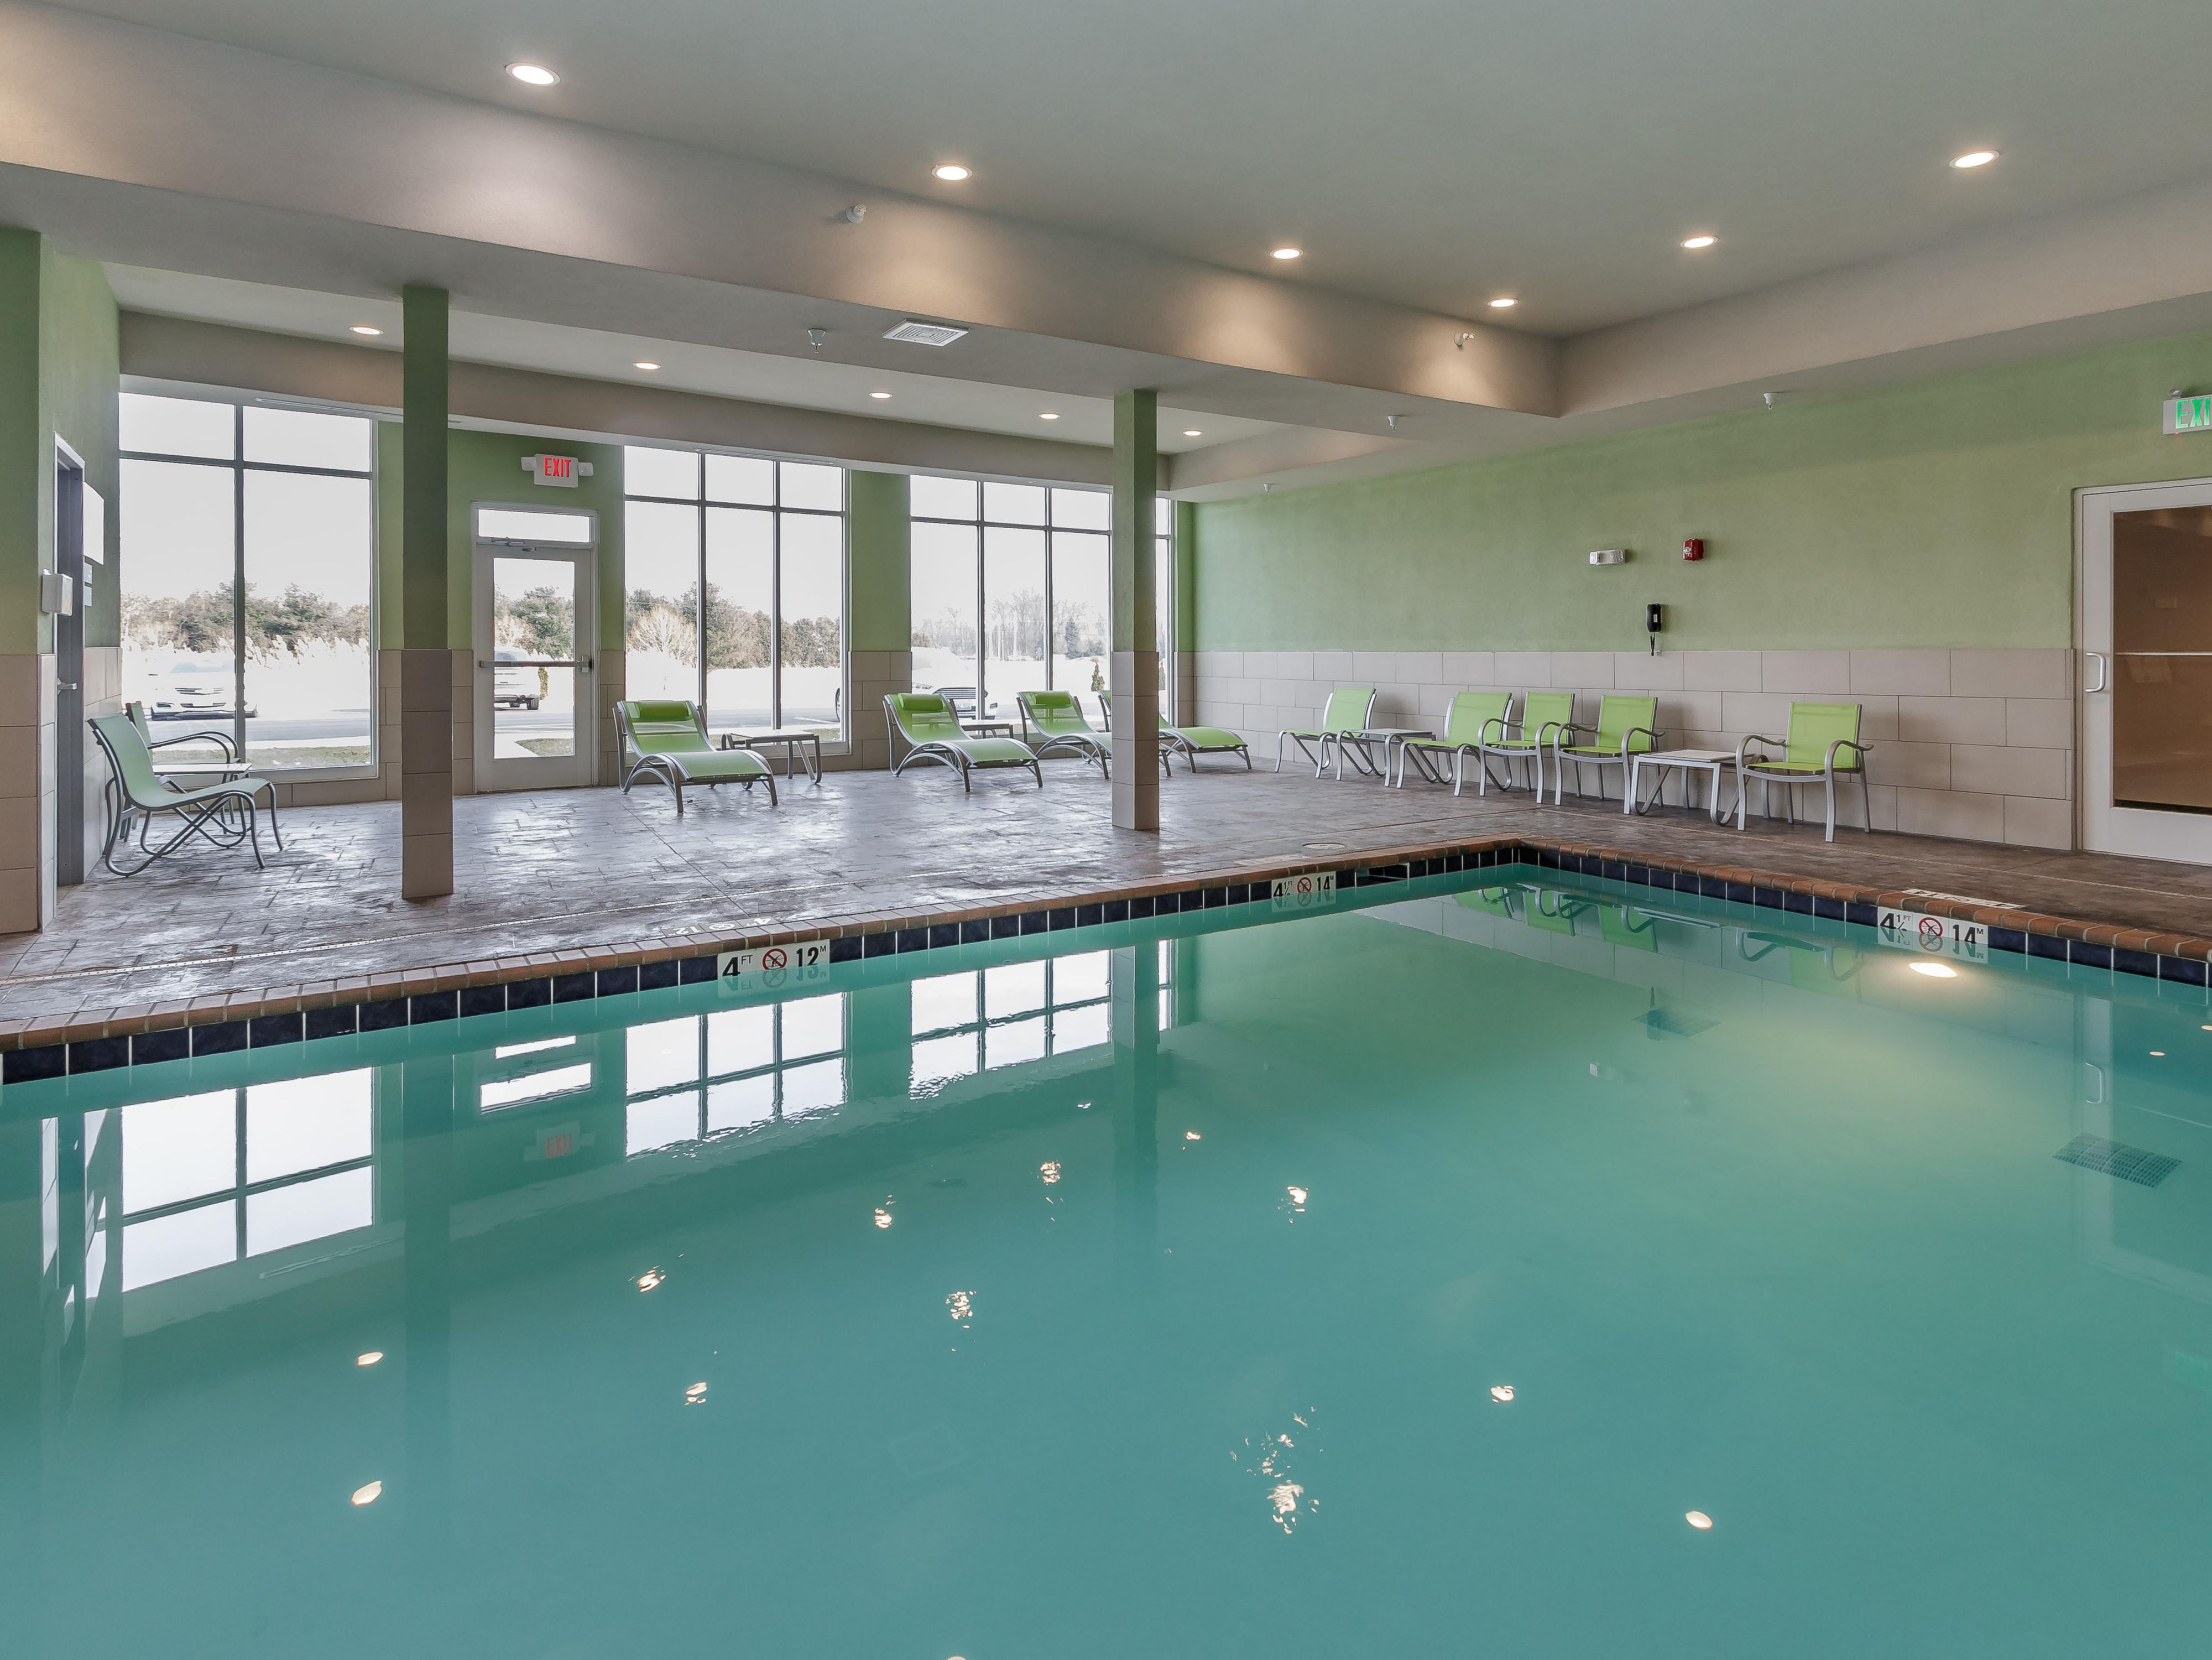 Enjoy a refreshing dip in our indoor heated pool! Perfect for family time or relaxing after a long day. Towels are provided for your comfort and convenience